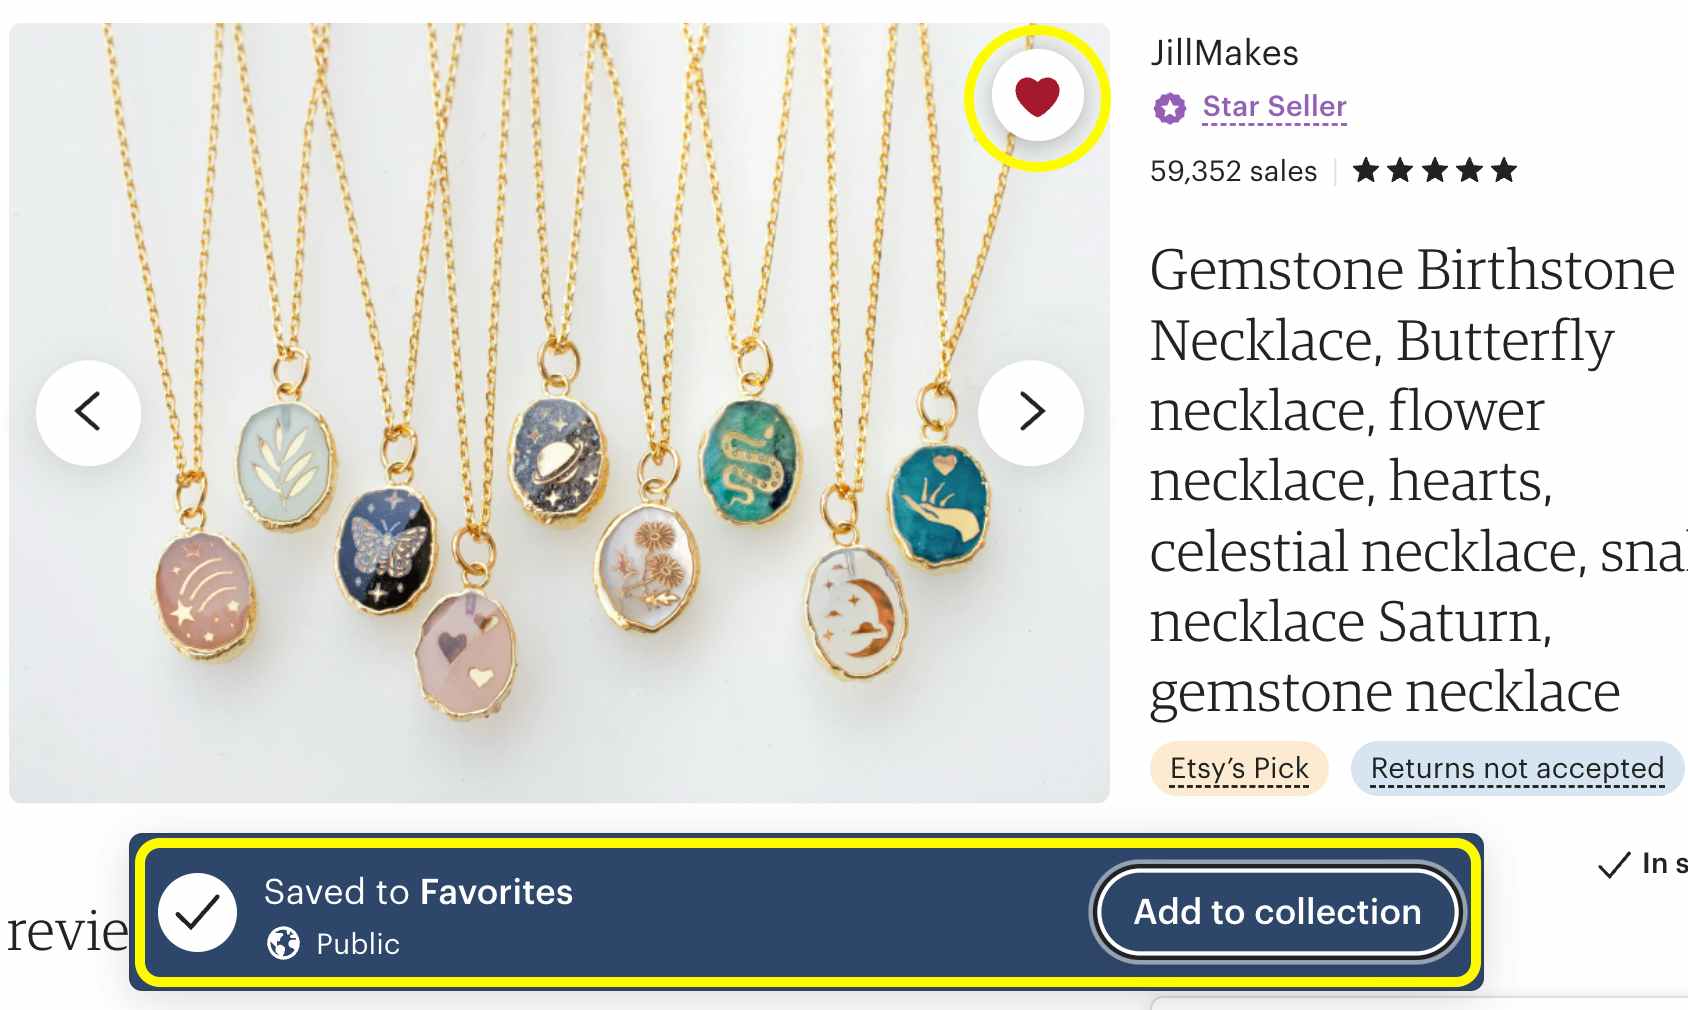 A screenshot of an Etsy product that has been favorited.